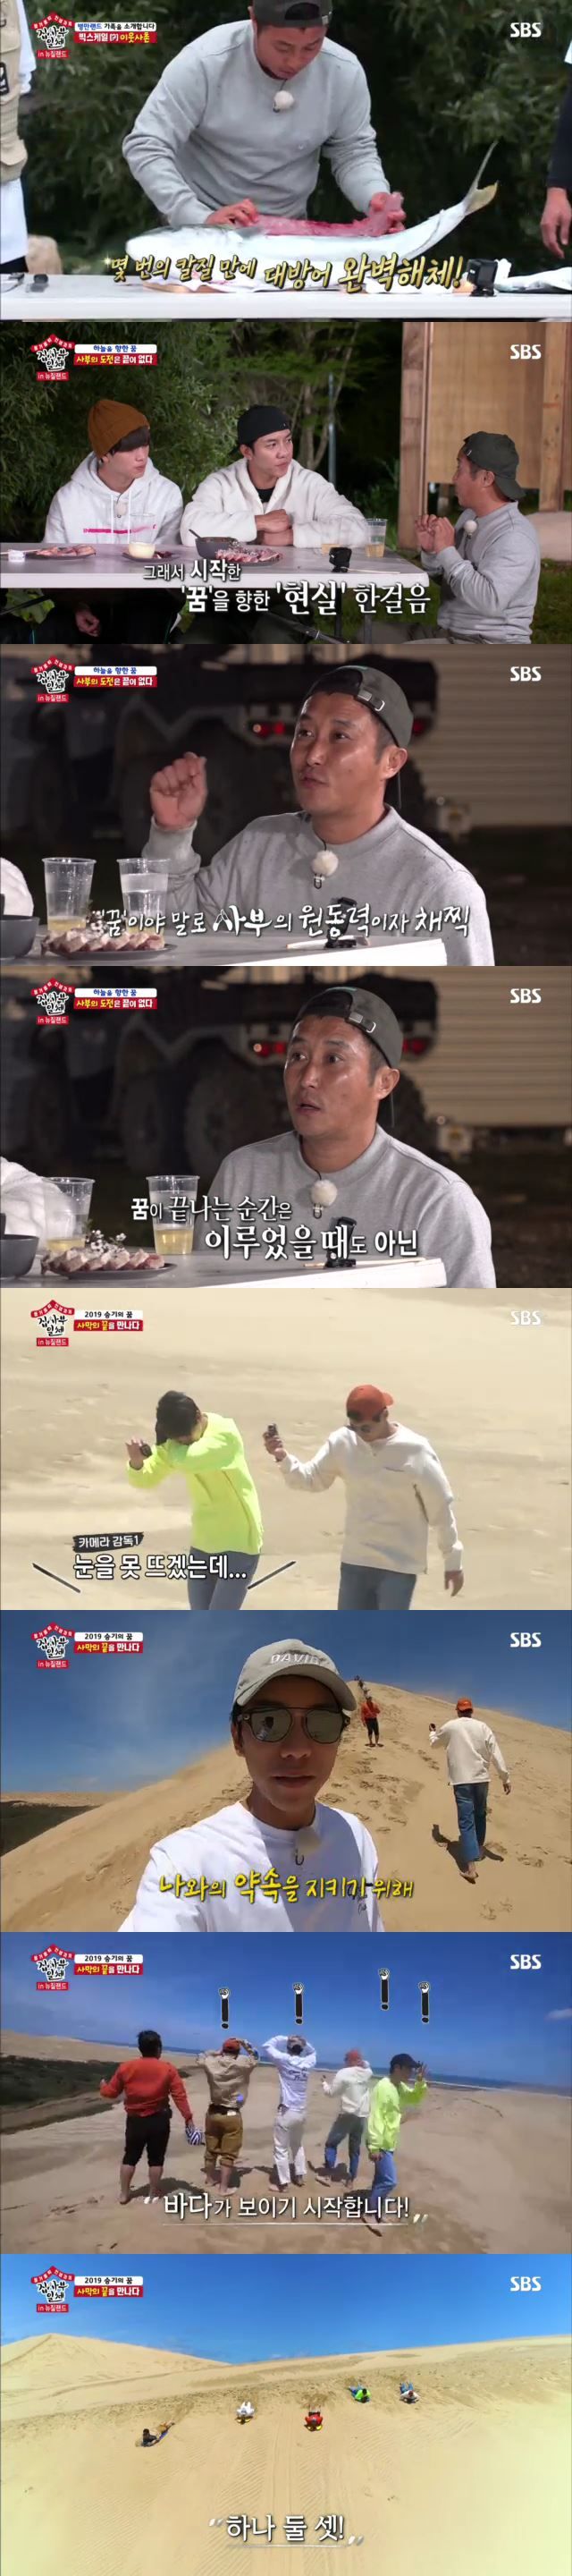 The All The Butlers master Kim Byung-man, who constantly tops the new goal, gave a touching impression.According to Nielsen Korea, SBS All The Butlers, which was broadcast on the 22nd, recorded 7.8% of furniture TV viewer ratings (hereinafter the second part of the metropolitan area), and 3.1% of 2049 target TV viewer ratings for young viewers aged 20 to 49.The scene where Master Kim Byung-man achieves another new goal was the highest TV viewer ratings per minute, up to 8.6 percent.On this day, Master Kim Byung-man, Lee Seung-gi, Lee Sang-yoon, Yang Sung-jae, and Yang Se-hyung talked about dreams and Top Model while having dinner in a direct defense.Kim Byung-man said, I think you will continue to show something, Lee Seung-gi said, I really like Planes rather than to show them.I learned English one by one, which I had difficulty in, he said. I got to this place.I want to learn in a country where flight is activated. There was also a moment of frustration for him: Kim Byung-man told the story of his spinal injury during a skydiving exercise in 2017, saying: I dont give up.If you didnt hurt your back, you might not have taken the Planes. After you got hurt, your dream changed. He said, You can go in any direction.You dont have to give up, he said.Kim Byung-man said, If I have a chance, I want to drive the 14-seater Planes.Kim Byung-man said, Dreams are the driving force behind me, I think theyre my whips, adding, The goal makes me run.When I achieve my dream, another dream comes up. I think my dream is over only when I die. The next day Kim Byung-man led the members to the desert, saying, There is something I want to take.Kim Byung-man said, I used to see Son Ye-jin talking about the desert crossing (Lee Seung-gi) with the goal of 2019.So I want to keep that promise, he said, explaining why he came to the desert.The members followed Kim Byung-man into the desert, but this was not easy, and it was difficult to take a step forward because of the sun and sandy wind as well as the sand that fell on their feet.Lee Seung-gi said, My dream was a desert, but I did not know that the desert was this place. However, the scenery of the desert hill top, which overcame the hardships, made me forget the hardships of the past.The members cheered on the beautiful scenery of Mother Nature.Finally, the place where Kim Byung-man headed with the members was Cape Leinga, north of New Zealand, where Kim Byung-man revealed another new goal.Its about adding a Seoul sign to signs that signal the direction of key cities around the world.I had a sign in the direction of Seoul while shooting Jungles Law, but it was so windy that it disappeared, so it was one of the goals to put this sign back, he explained.Kim Byung-man and the members joined forces to put on a sign, and Kim Byung-man added, I hope our country will be proud to see it.This scene, which Kim Byung-man and the members joined together to achieve the goal together, gave a warm heart and won the best one minute with 8.6% of Bundang TV viewer ratings.